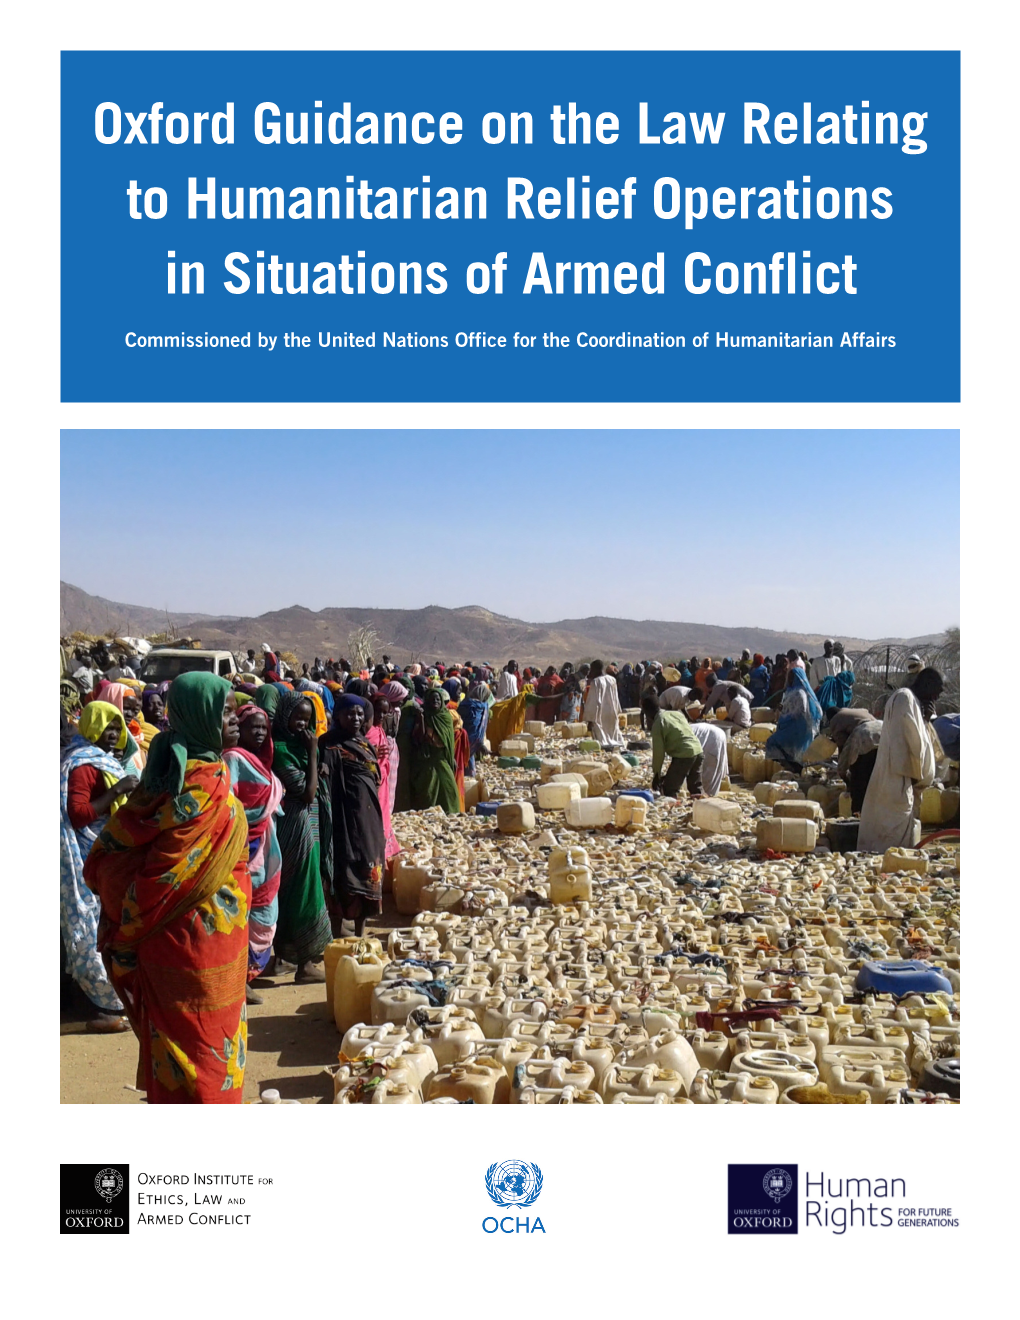 Oxford Guidance on the Law Relating to Humanitarian Relief Operations in Situations of Armed Conflict